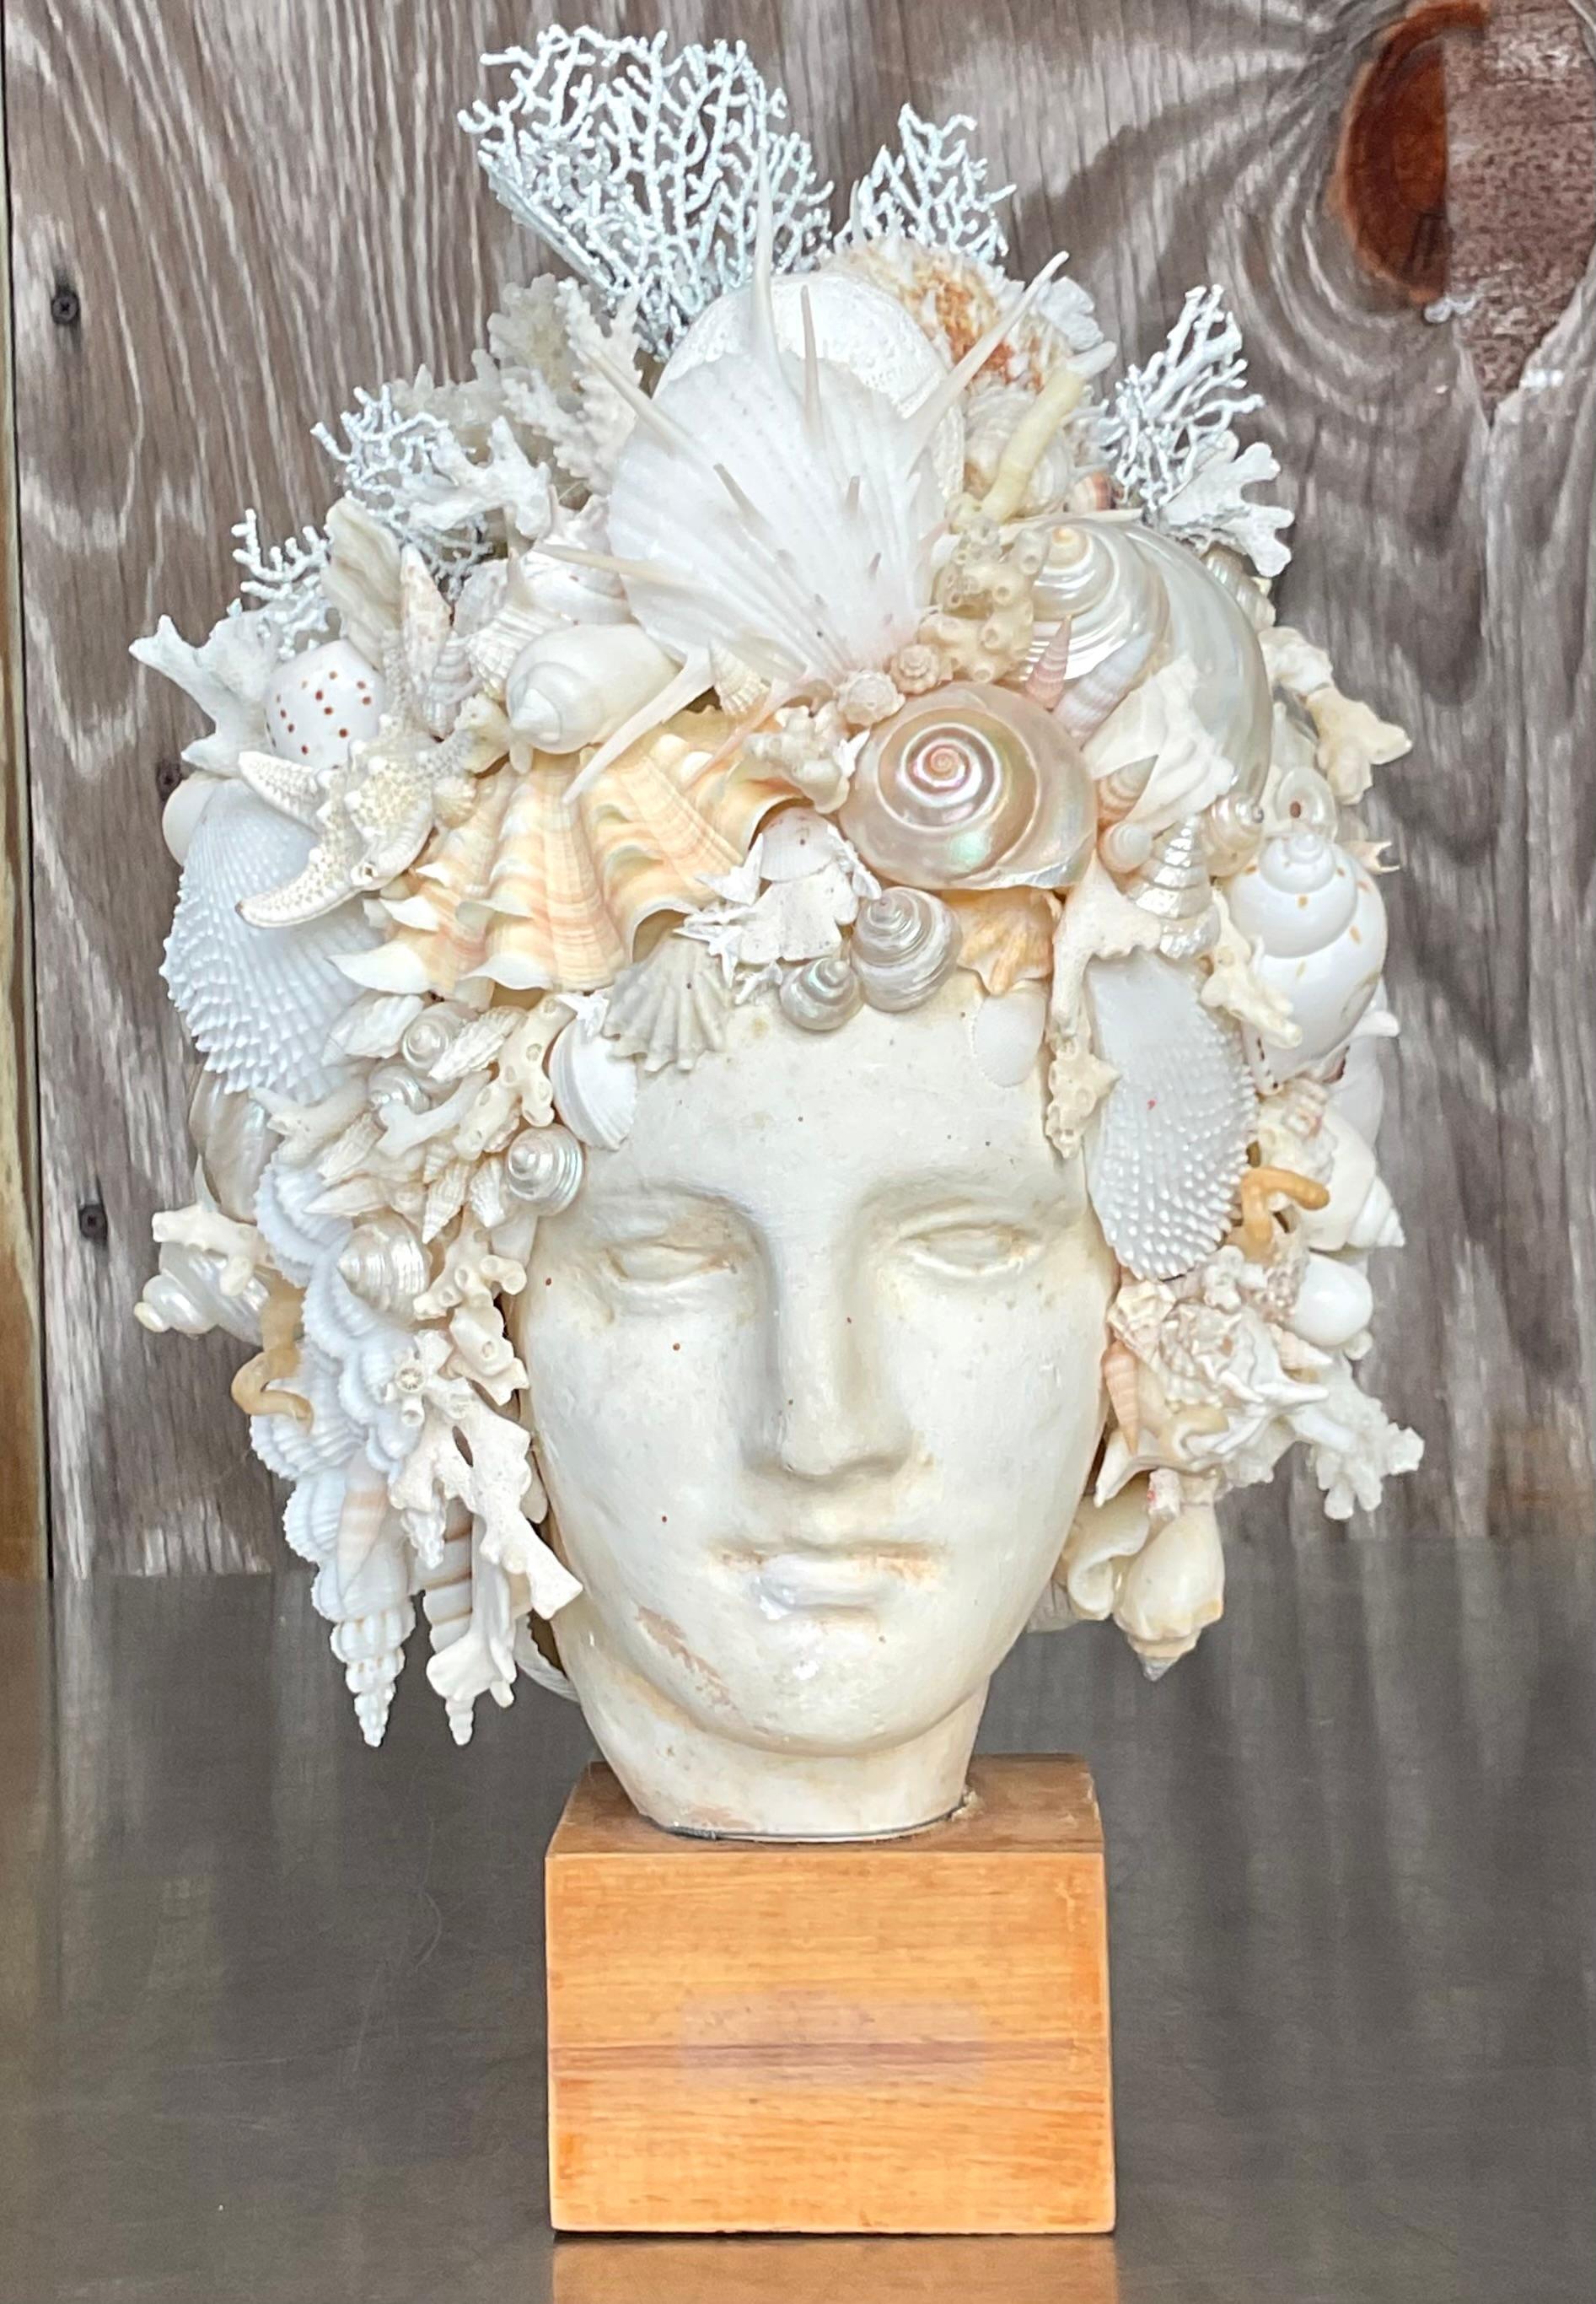 A stunning vintage plaster bust. A chic Shell encrusted man with all large and interesting shells. Sure to be the focal point of any space. With a plinth for extra drama.